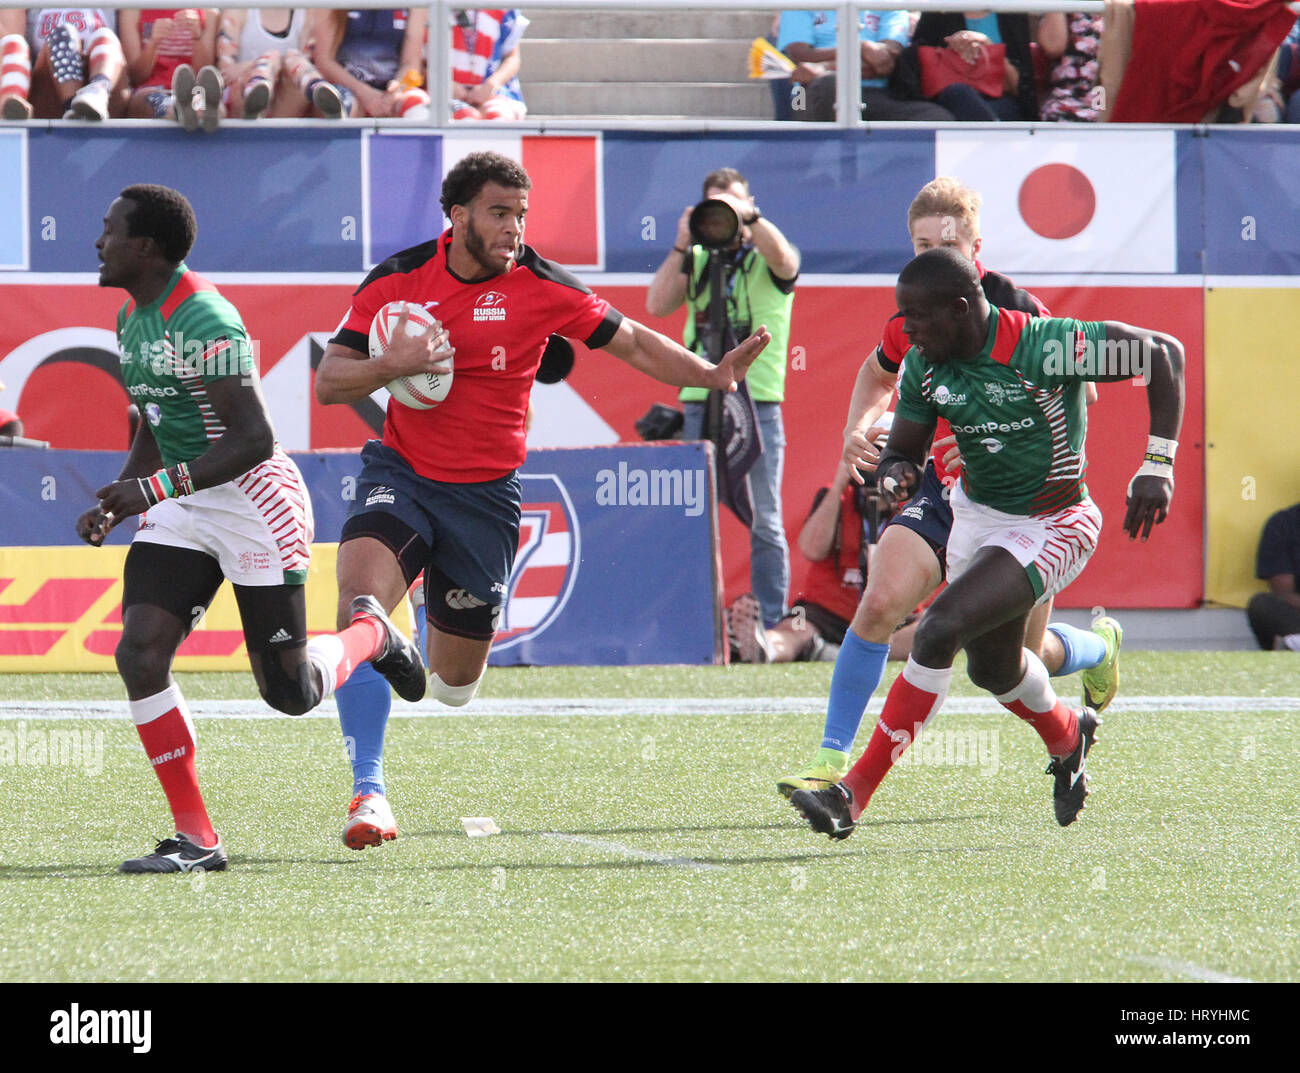 Las Vegas, Nevada, USA. 5th Mar, 2017. Russian Eme Patris Peke is tackled by Kenyan players during the 2017 USA Sevens International Rugby Tournament game between Kenya and Russia on March 4, 2017 at Sam Boyd Stadium in Las Vegas, Nevada Credit: Marcel Thomas/ZUMA Wire/Alamy Live News Stock Photo